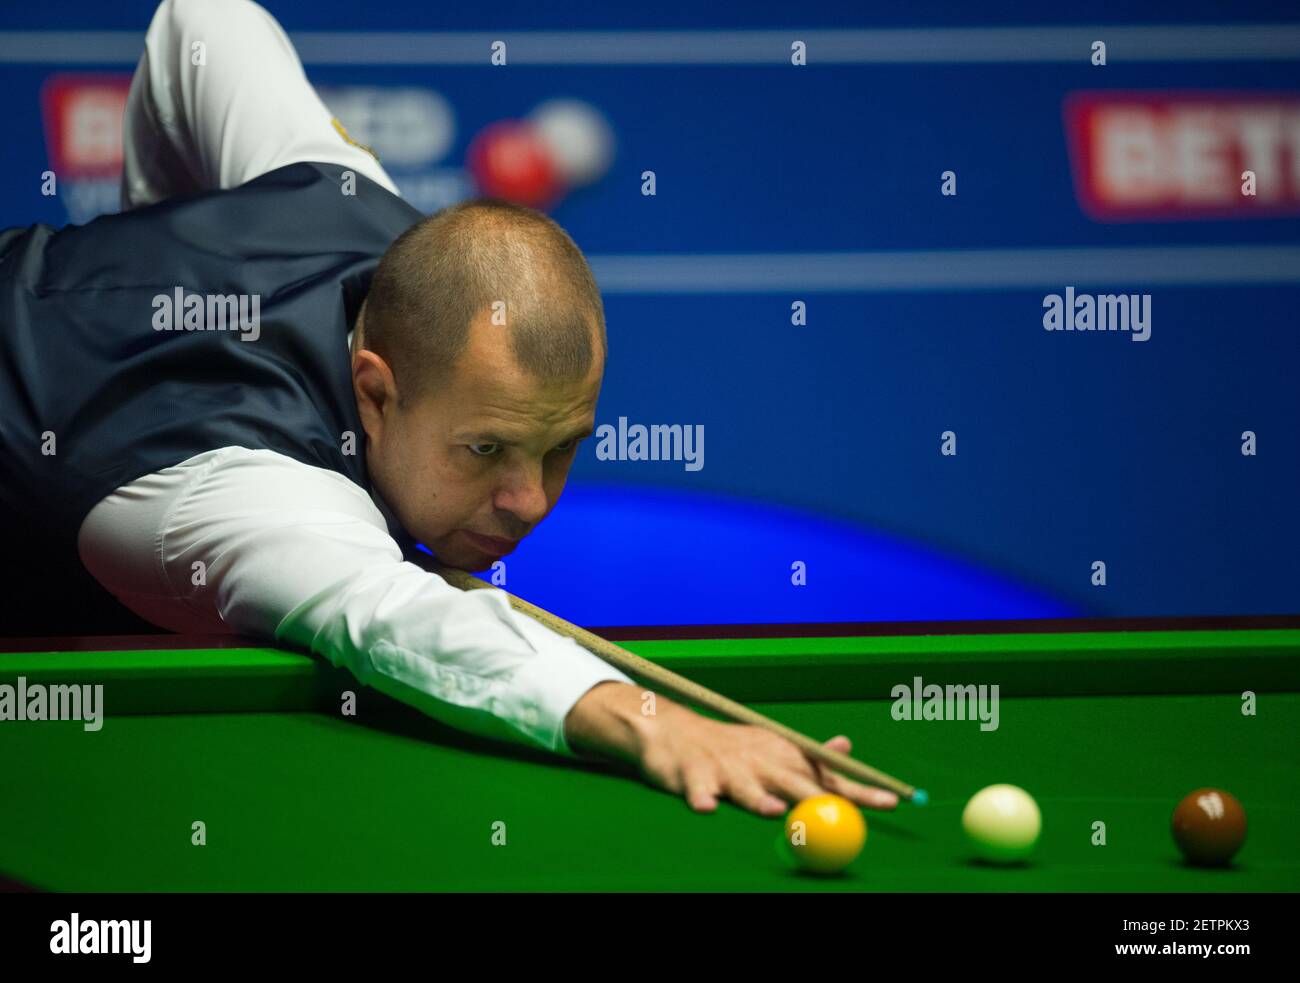 Sygdom Betydning cricket SP) BRITAIN-SHEFFIELD-SNOOKER-WORLD CHAMPIONSHIP-SEMIFINAL-HAWKINS VS  HIGGINS (170427) -- SHEFFIELD, Apr. 27, 2017 (Xinhua) -- Barry Hawkins of  England competes during the first session of the semi final match against  John Higgins of Scotland